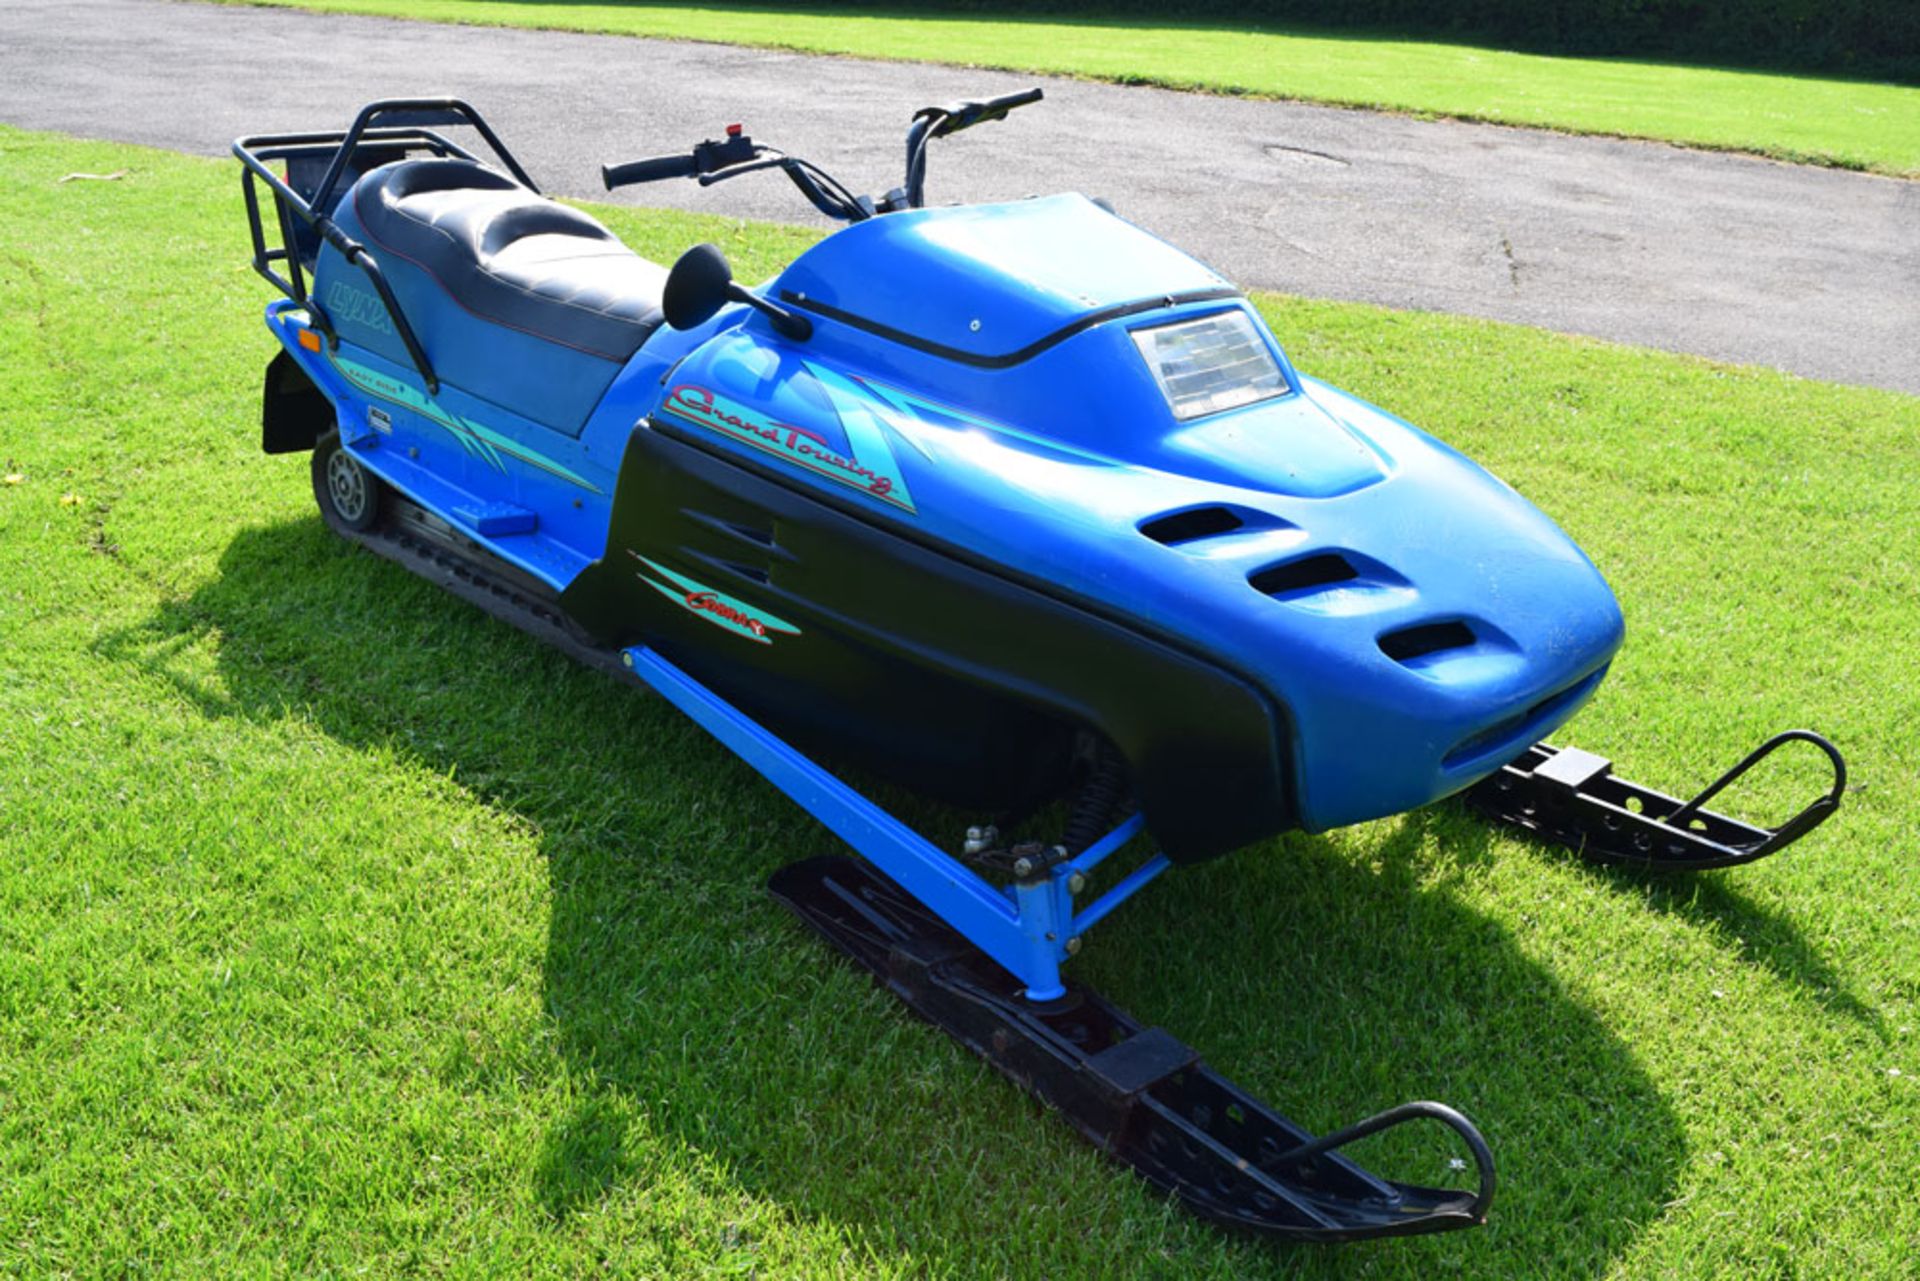 Cobra Lynx Grand Touring Electric Snow Mobile - Image 11 of 11